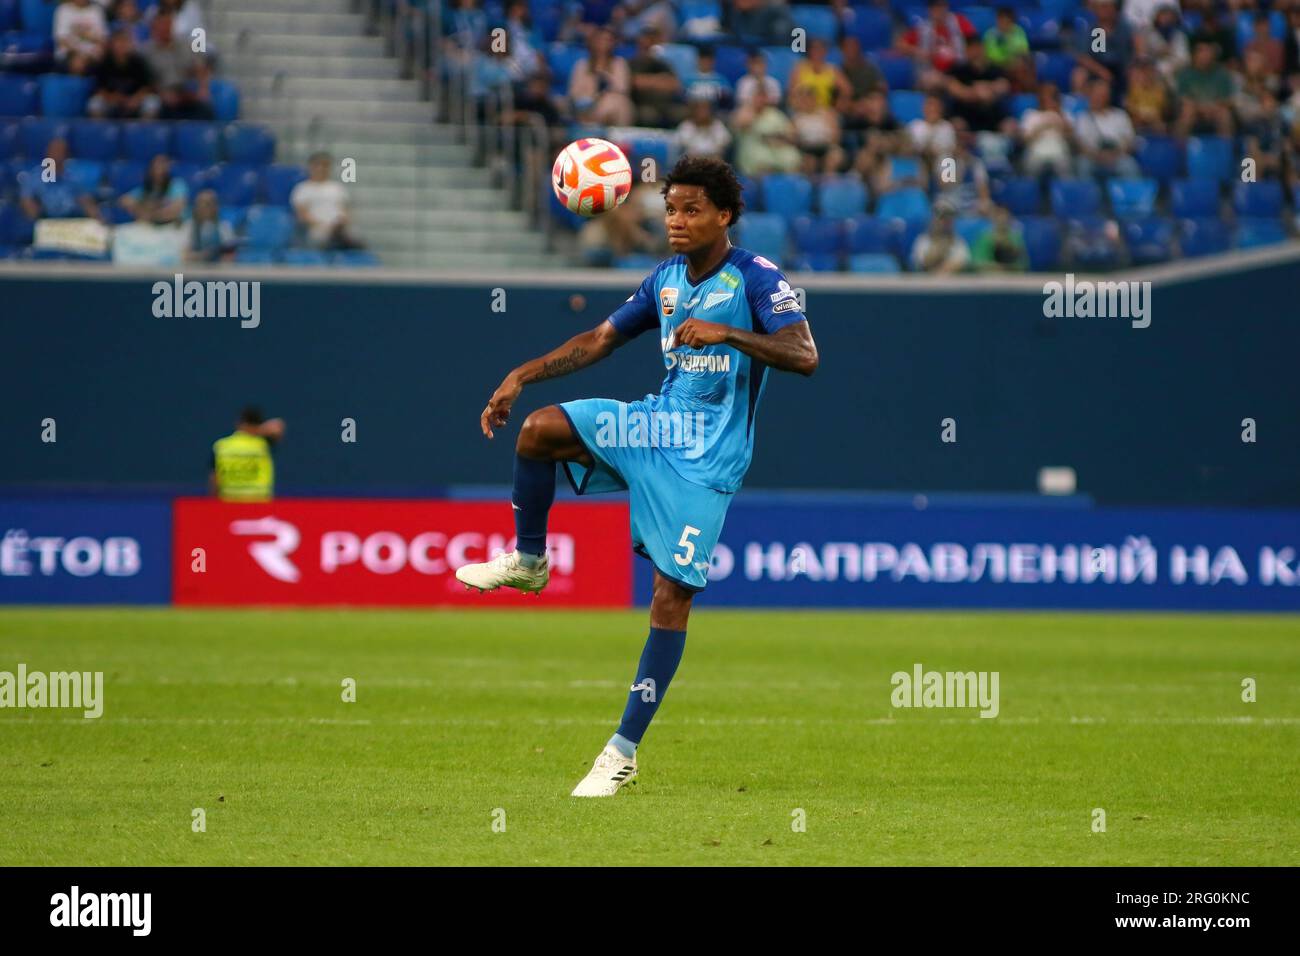 Saint Petersburg, Russia. 06th Aug, 2023. Wilmar Enrique Barrios Teran, known as Wilmar Barrios (5) of Zenit seen during the Russian Premier League football match between Zenit Saint Petersburg and Dynamo Moscow at Gazprom Arena. Zenit 2:3 Dynamo. Credit: SOPA Images Limited/Alamy Live News Stock Photo